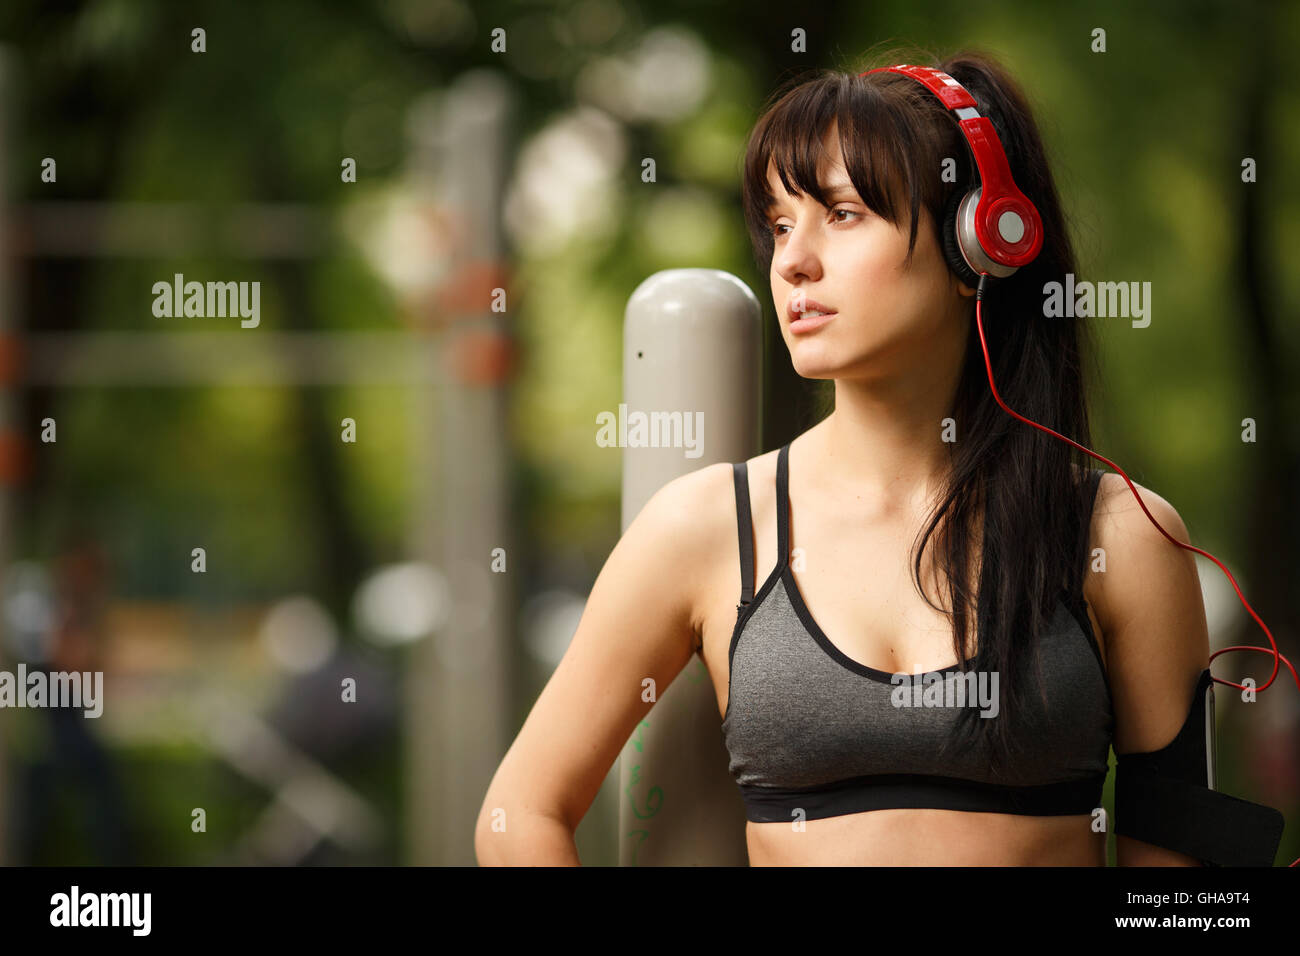 Portrait of dark-haired athletic young woman in big headphones Stock Photo